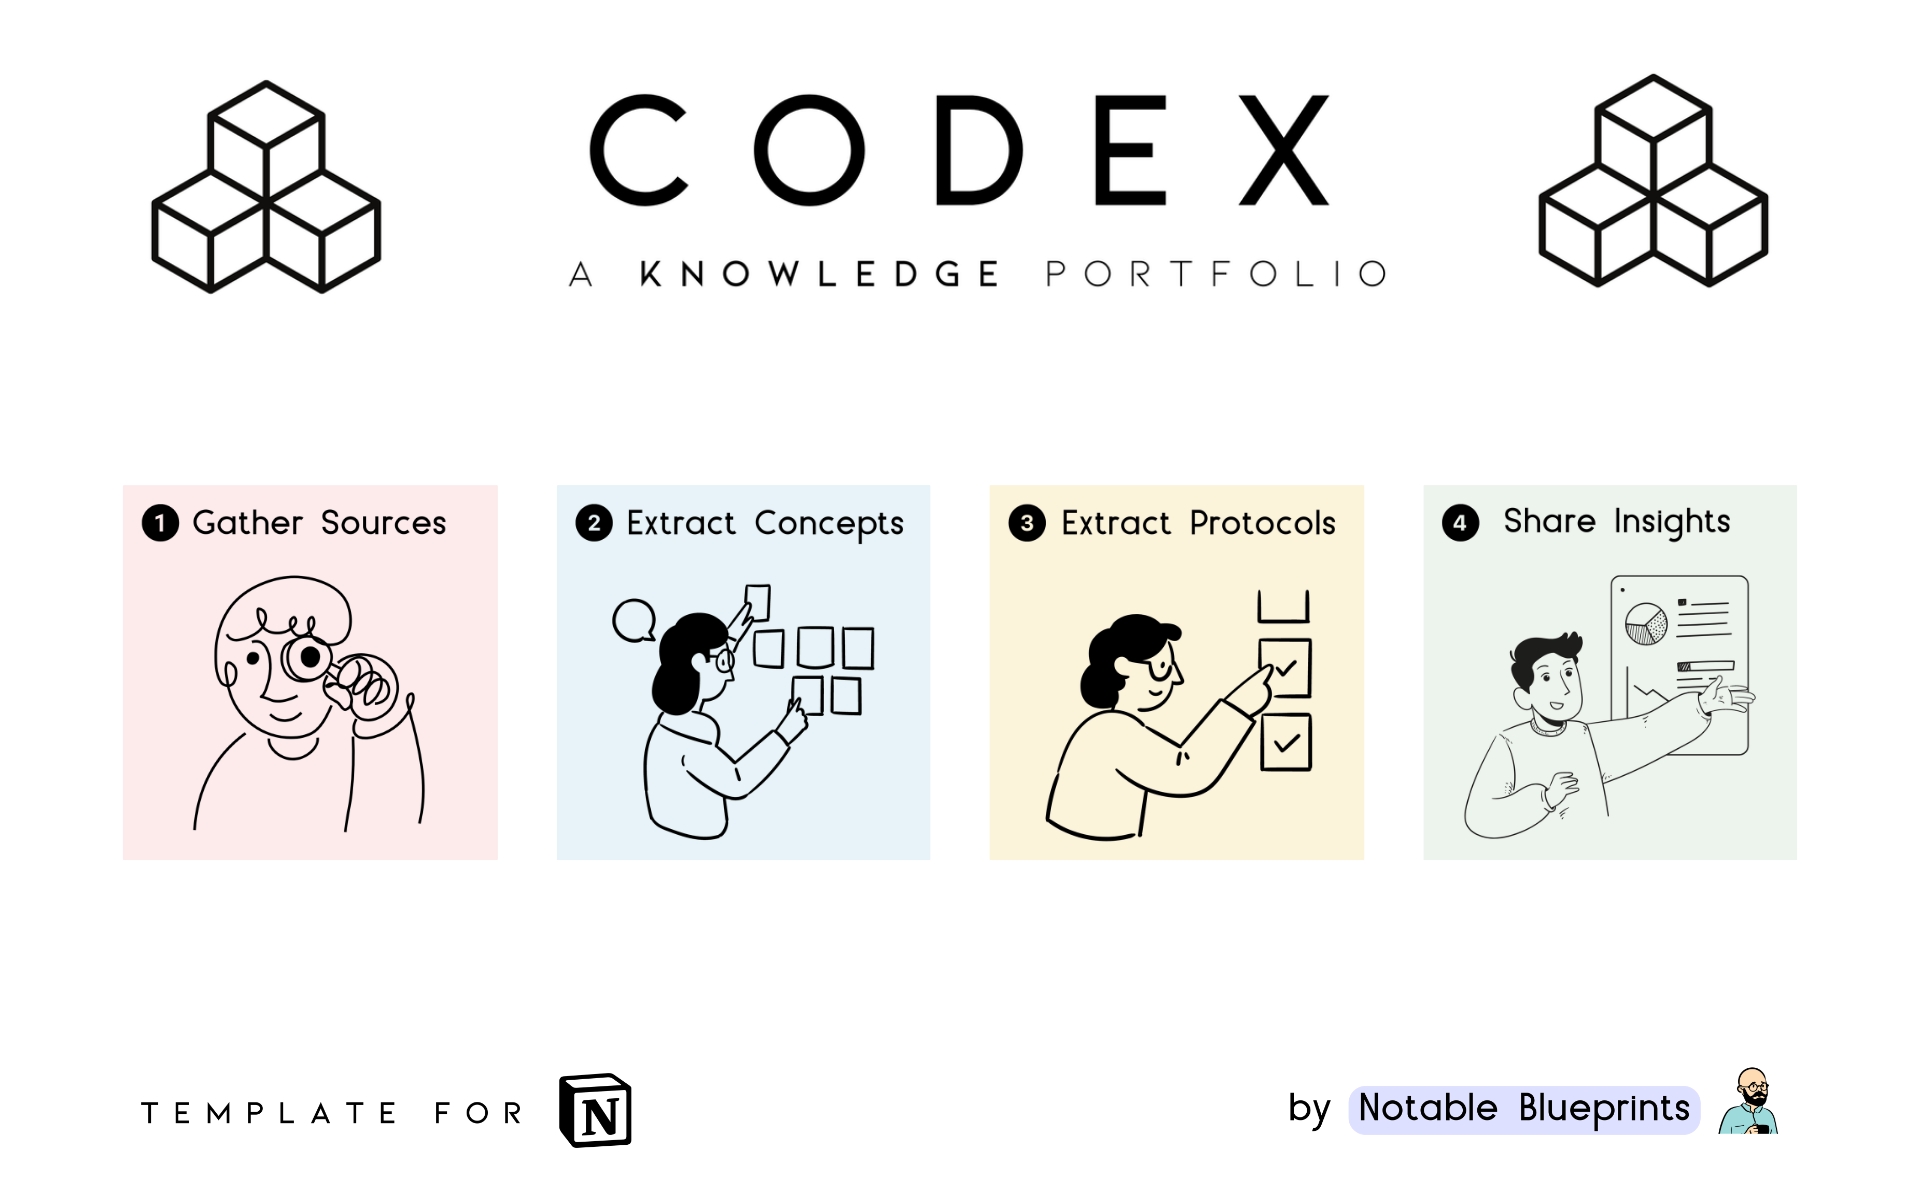 CODEX: A very intuitive & minimalistic Second Brain system. 

It's done via four buckets: 
1) Source Gathering
2) Concept Extraction
3) Protocol Creation
4) Insight Sharing

This minimalistic approach has helped me drastically streamlining my knowledge retention. 